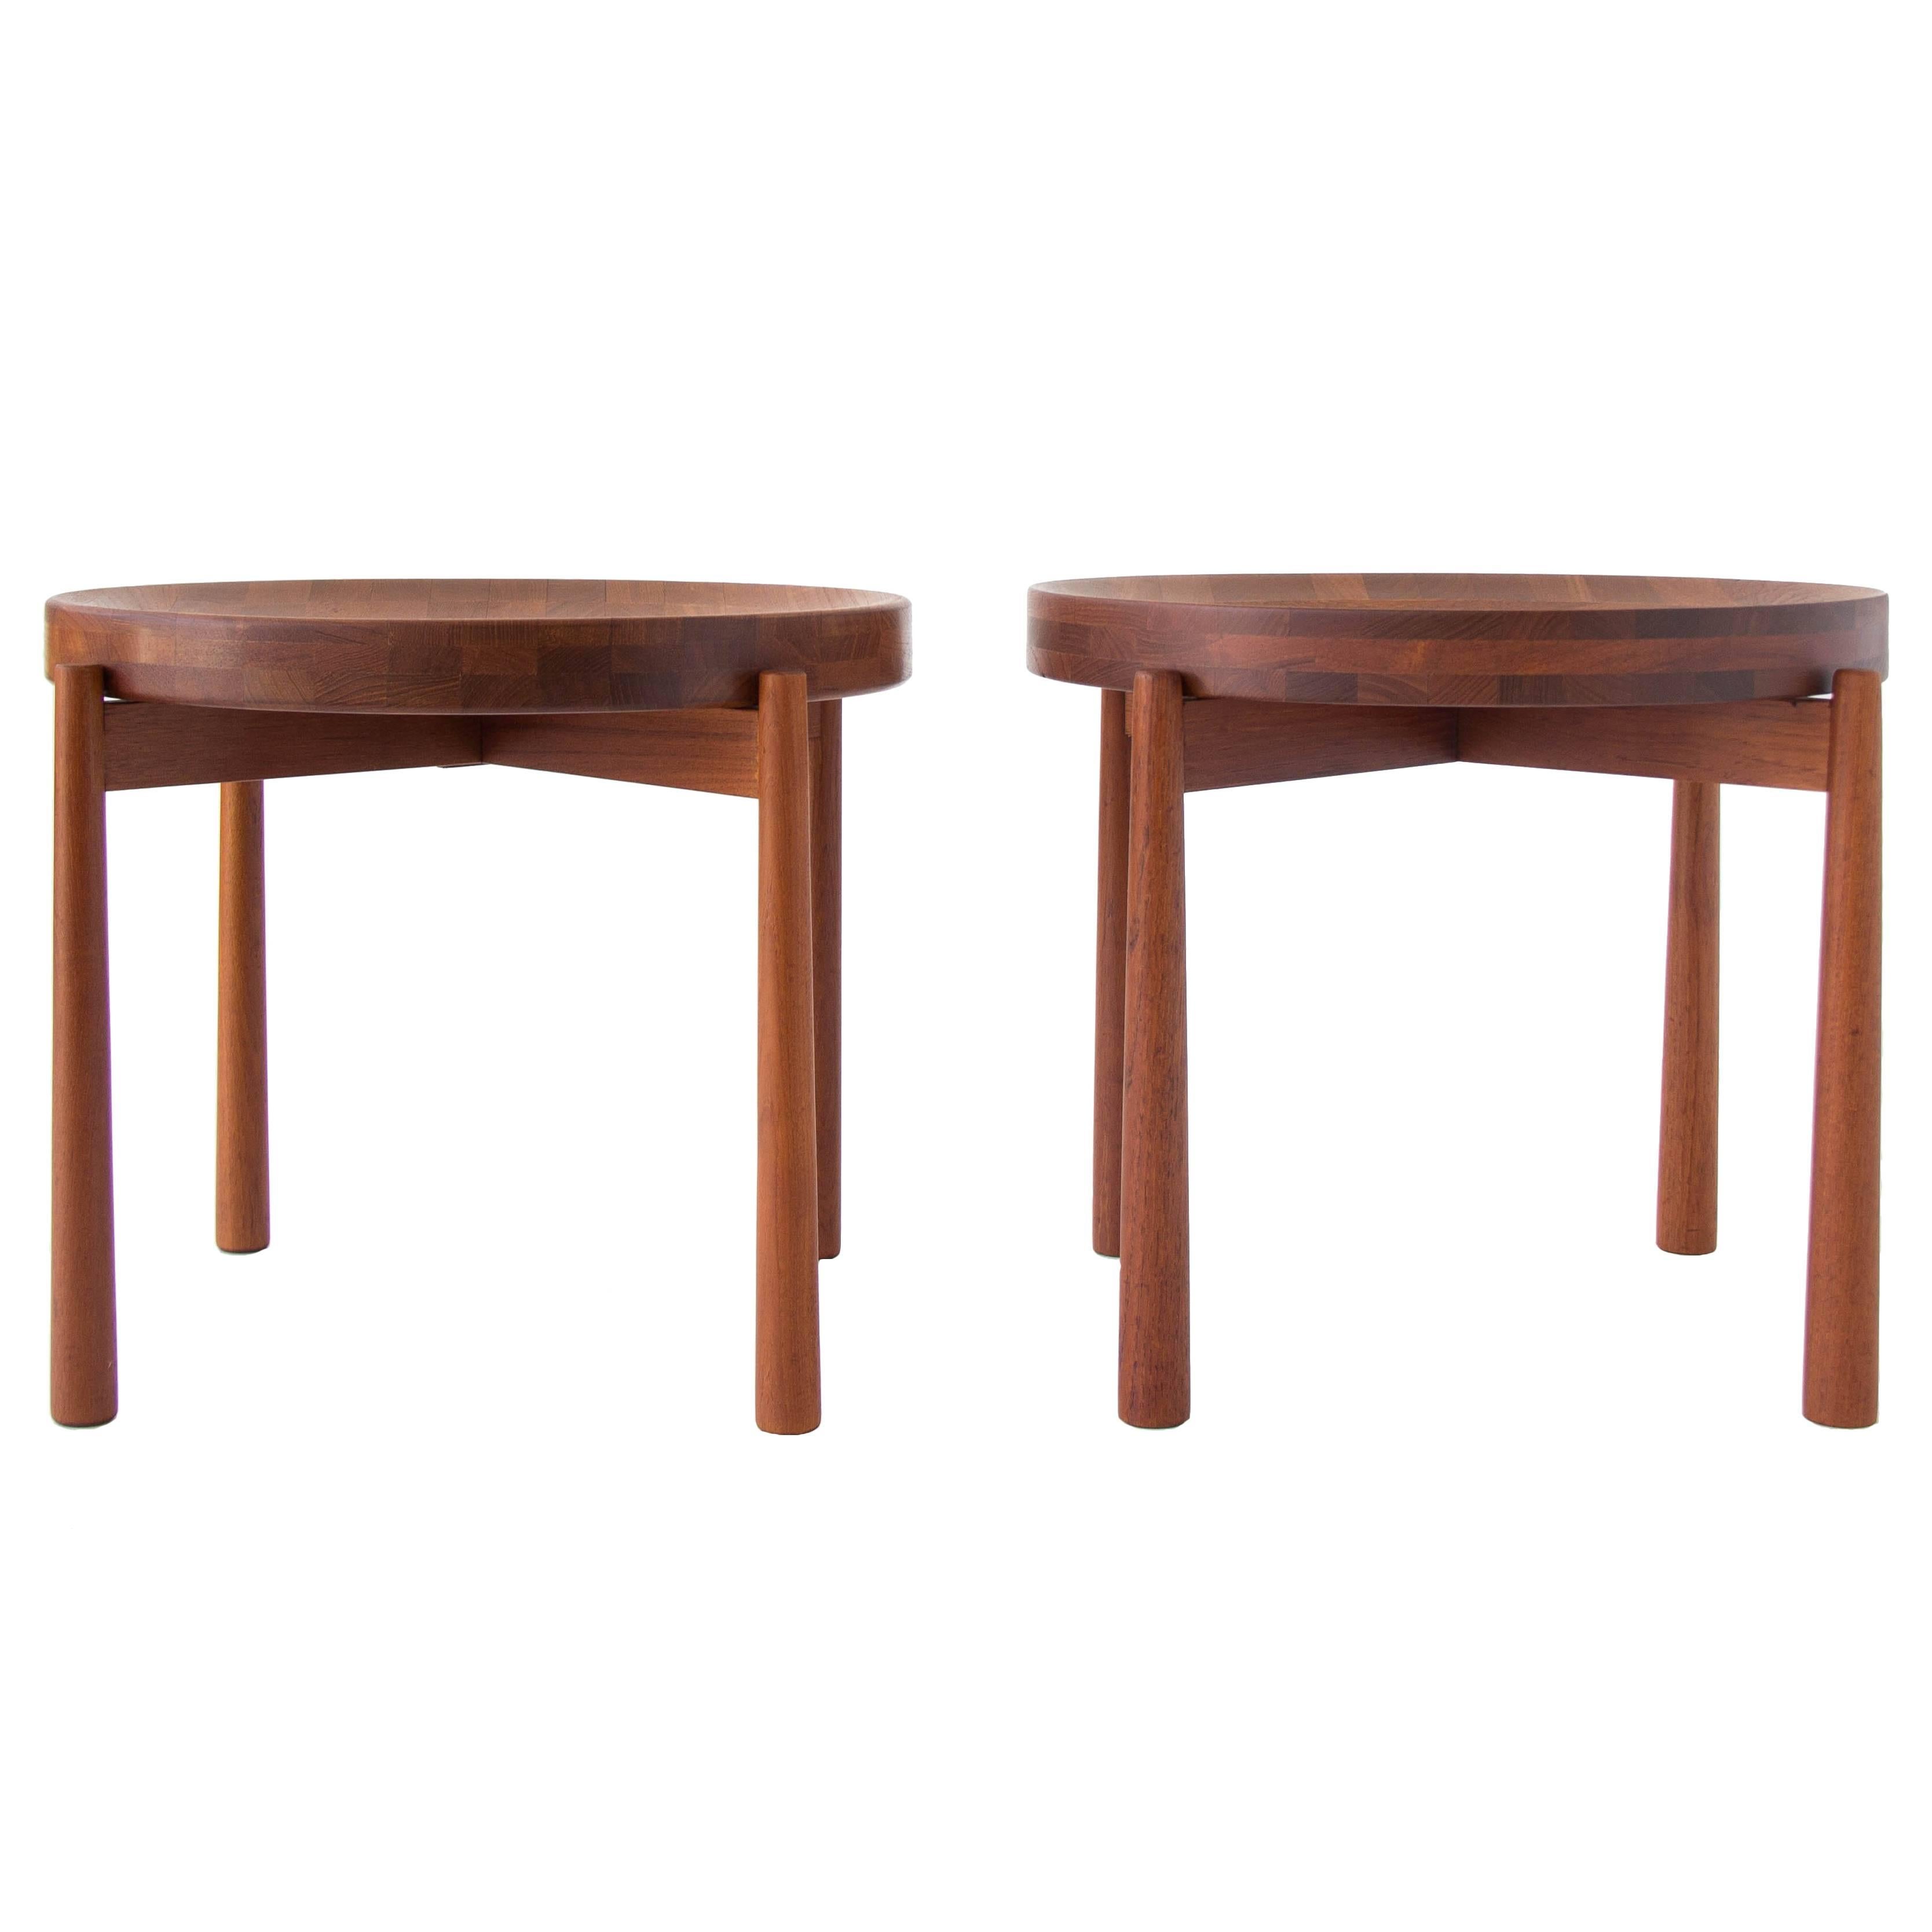 Pair of Teak Tray Tables in the style of Jens Quistgaard